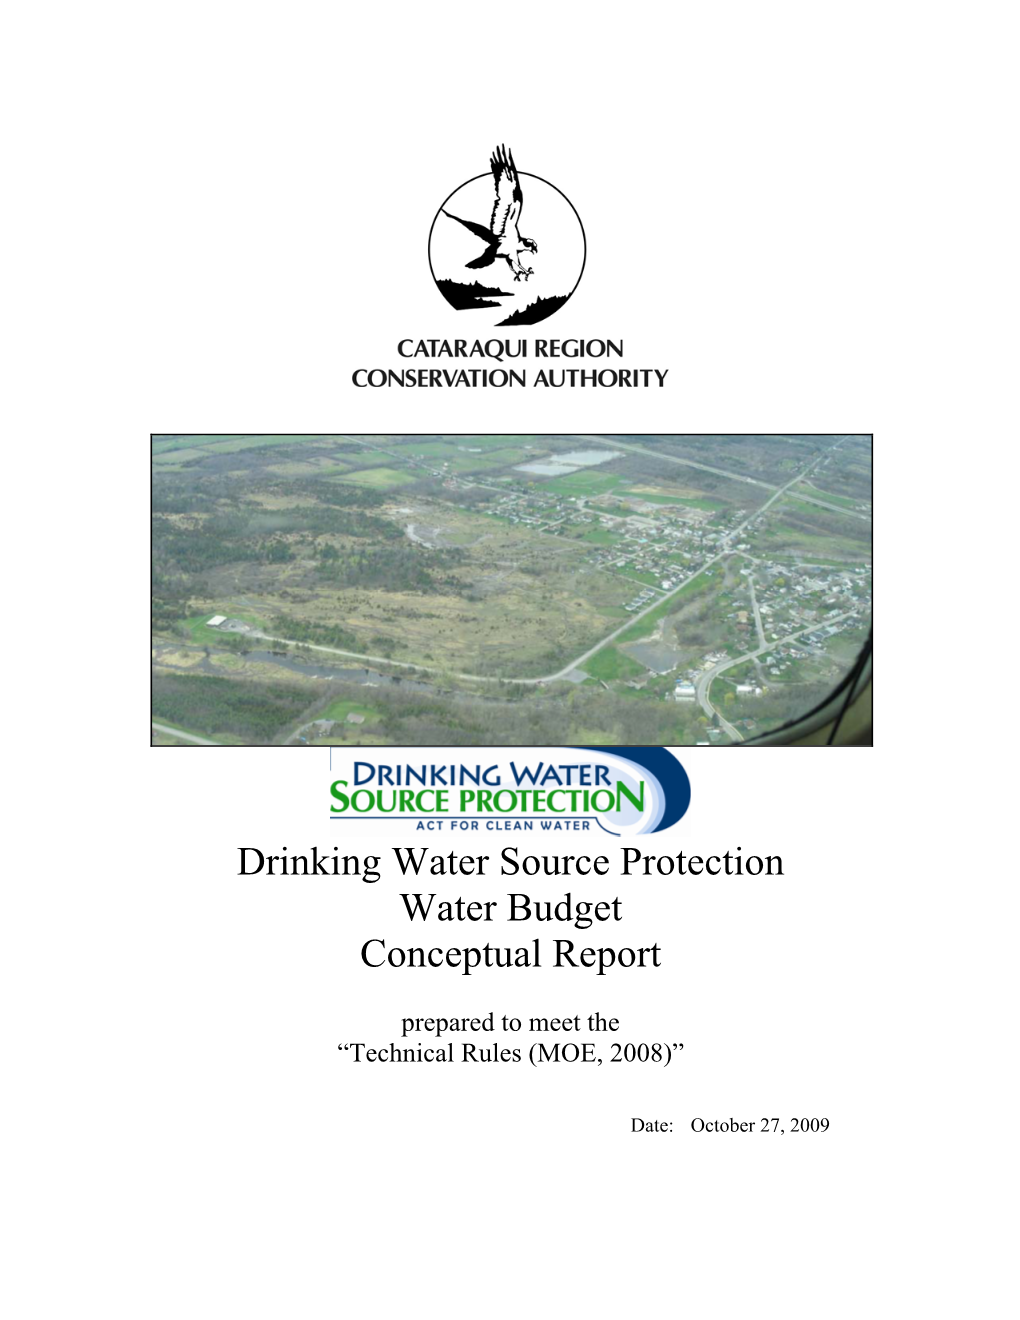 Drinking Water Source Protection Water Budget Conceptual Report